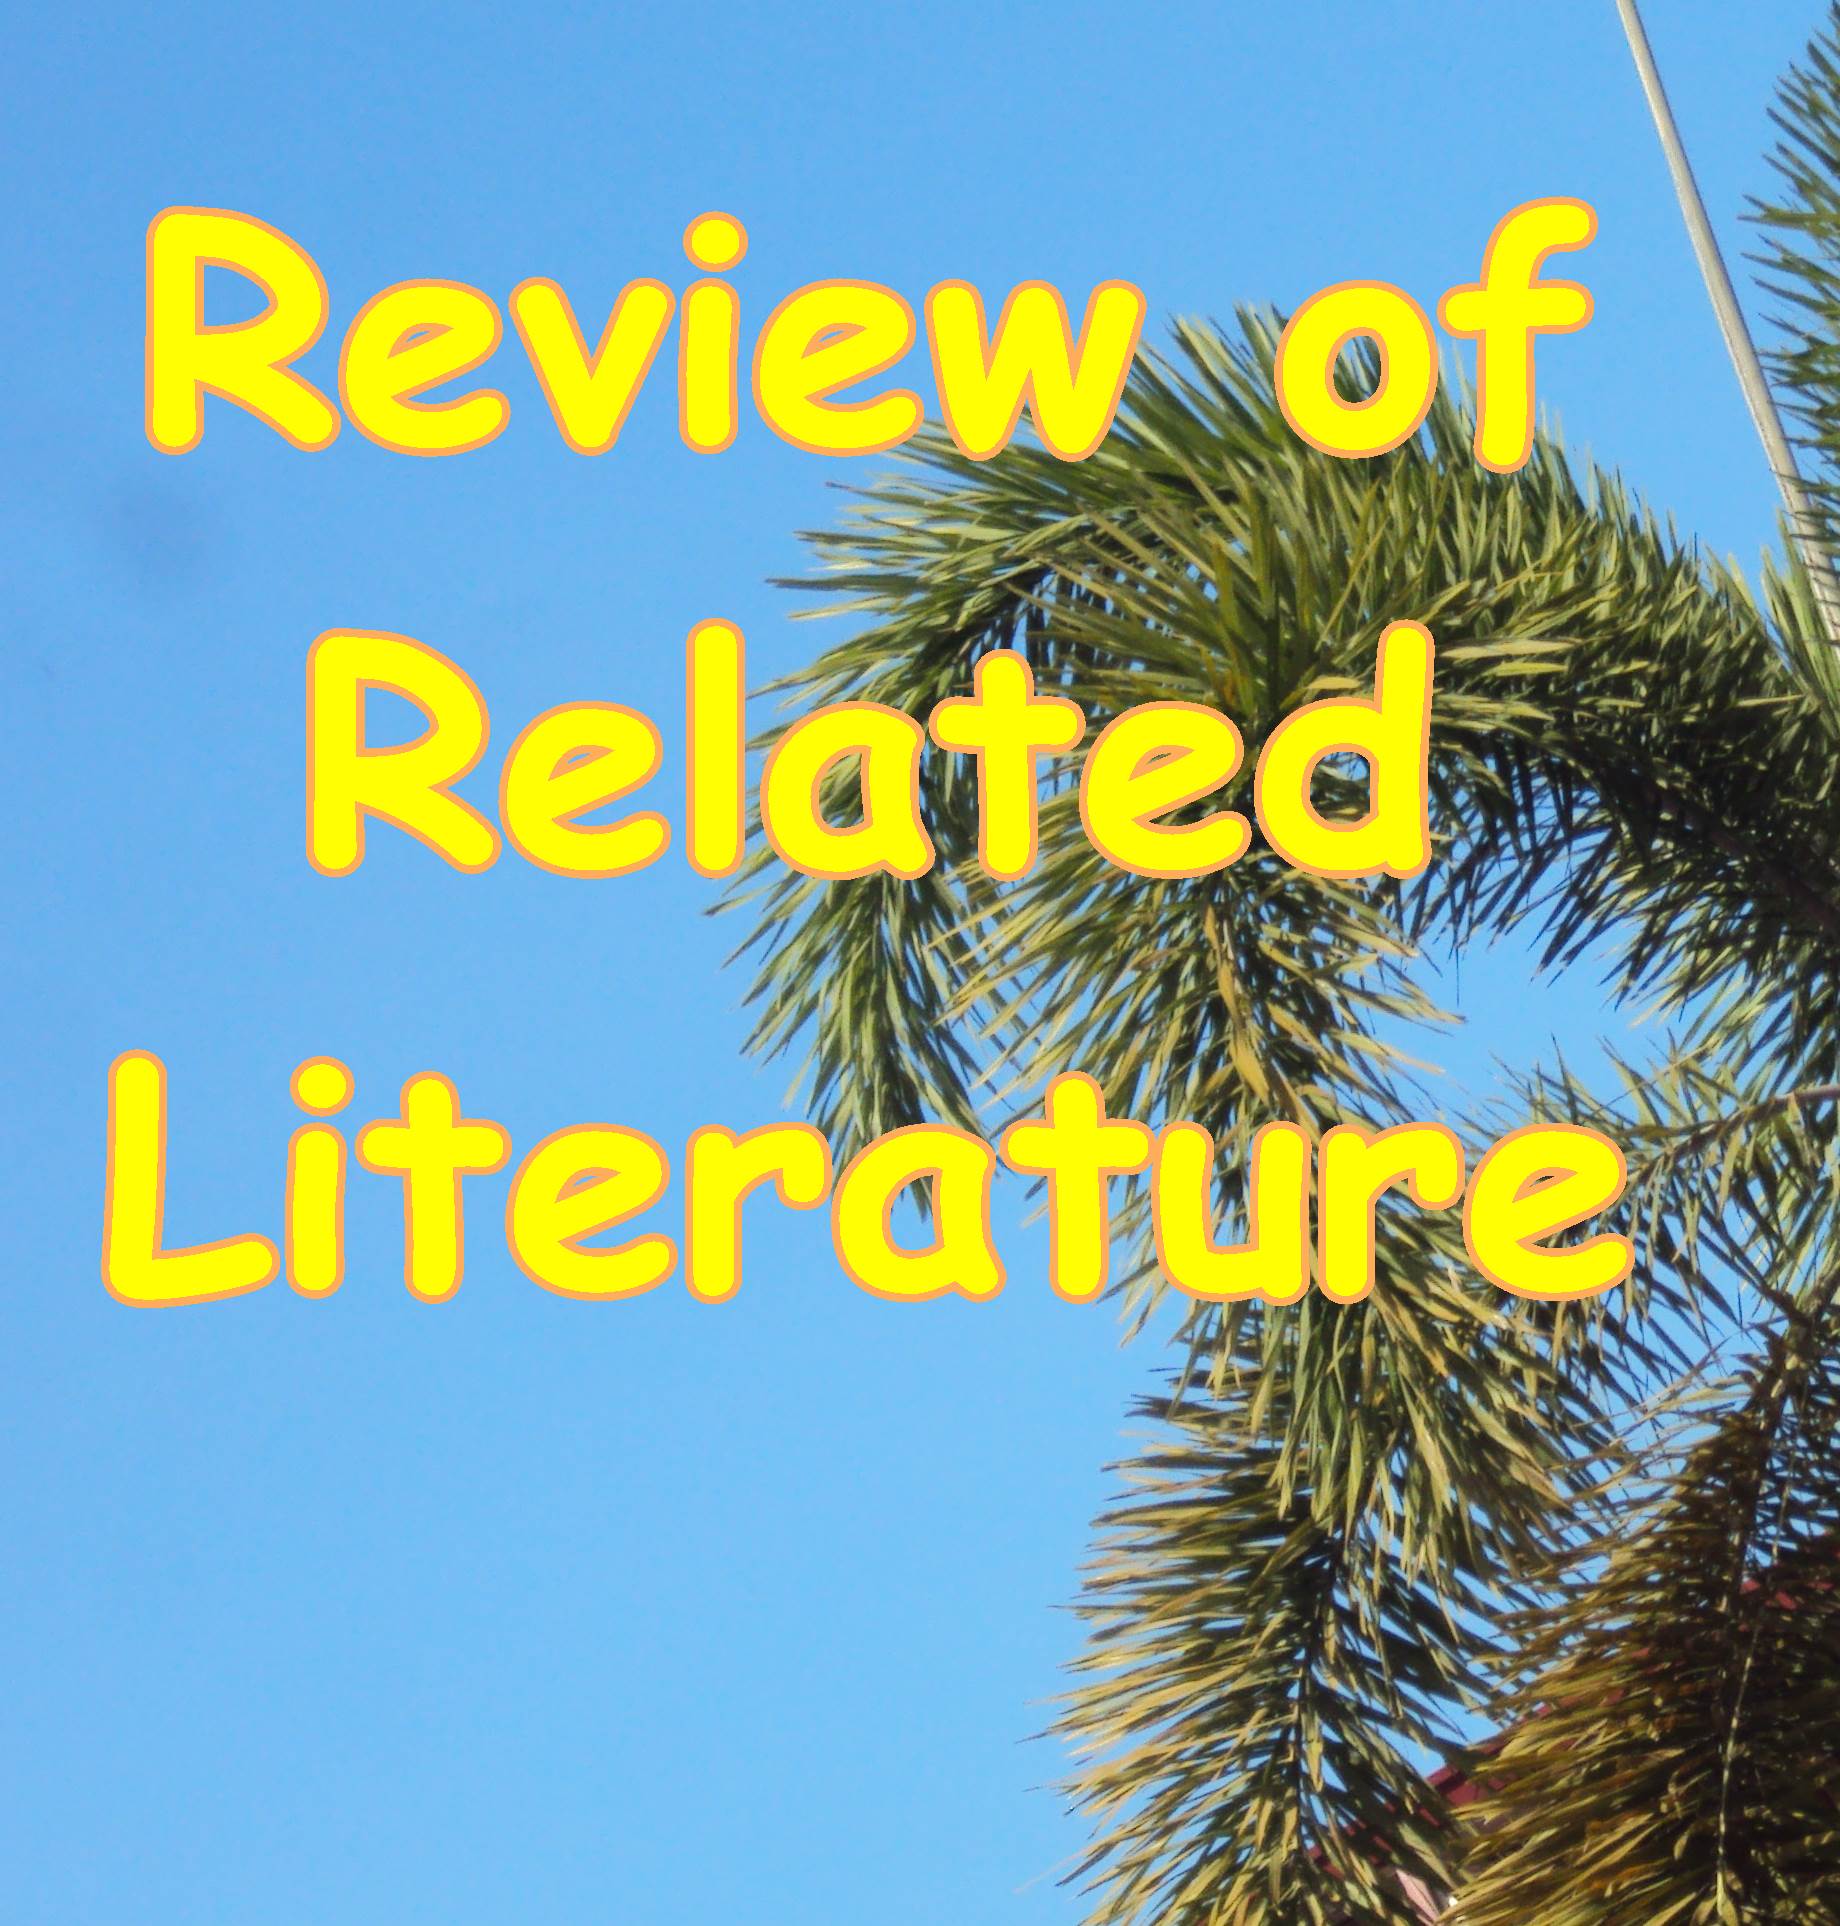 the review of related literature is the heart of a study